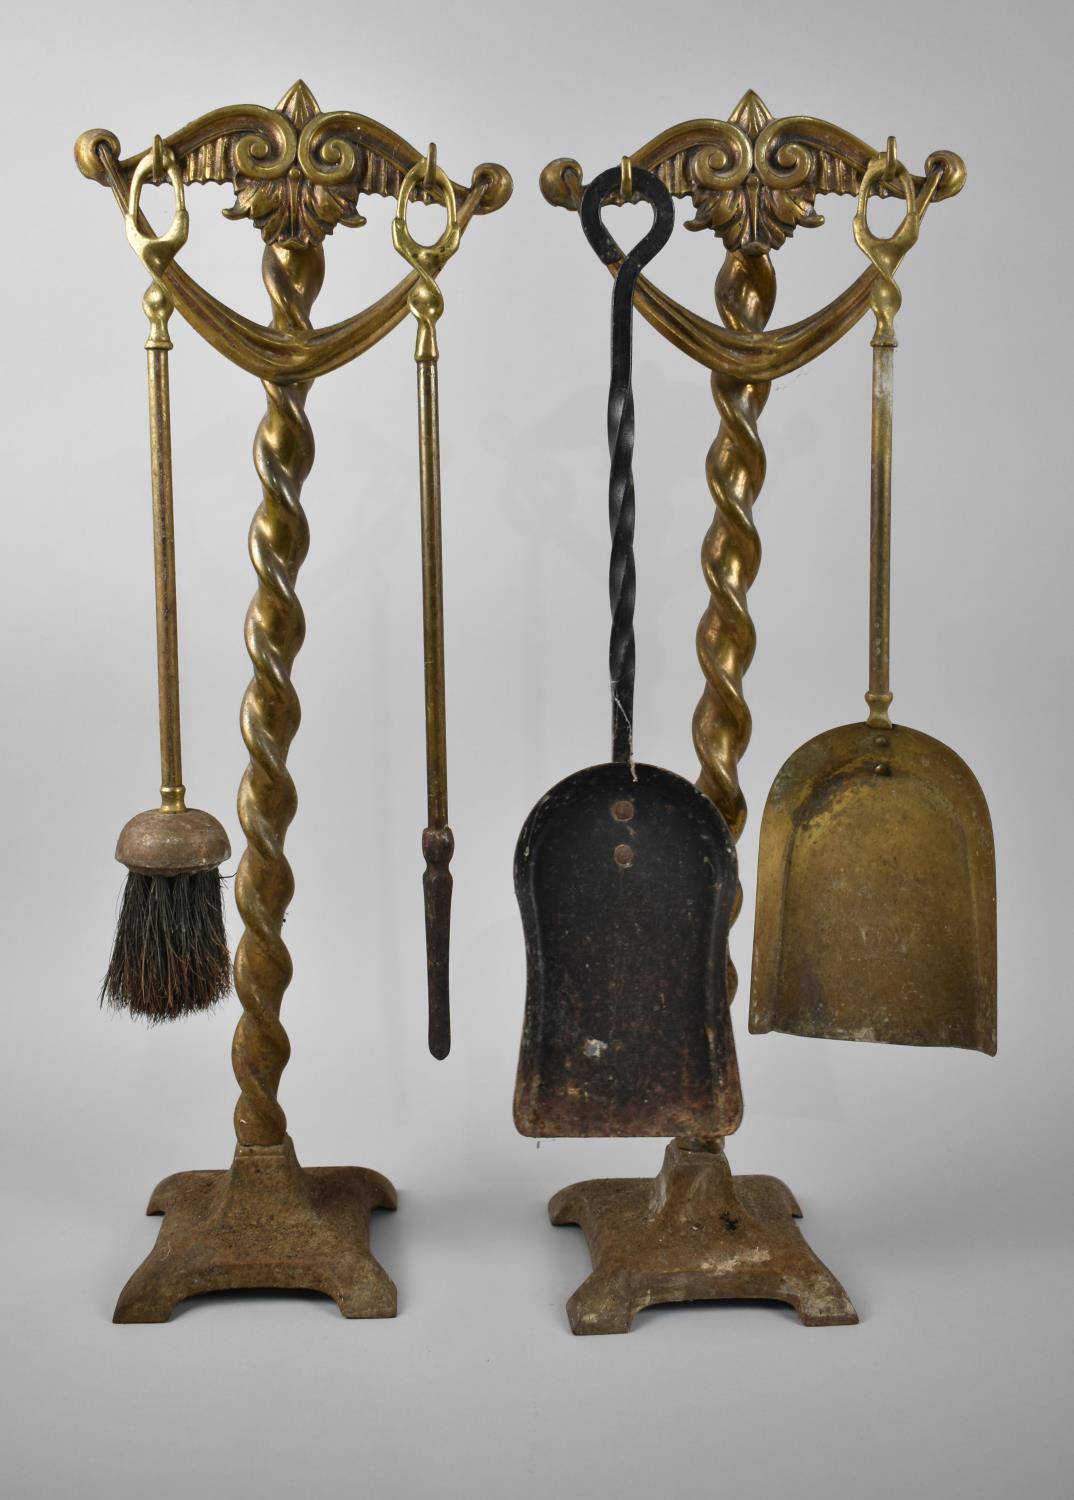 A Pair of Late 19th/Early 20th Century Brass Barley Twist Fire Companions with Fire Irons, 60cms